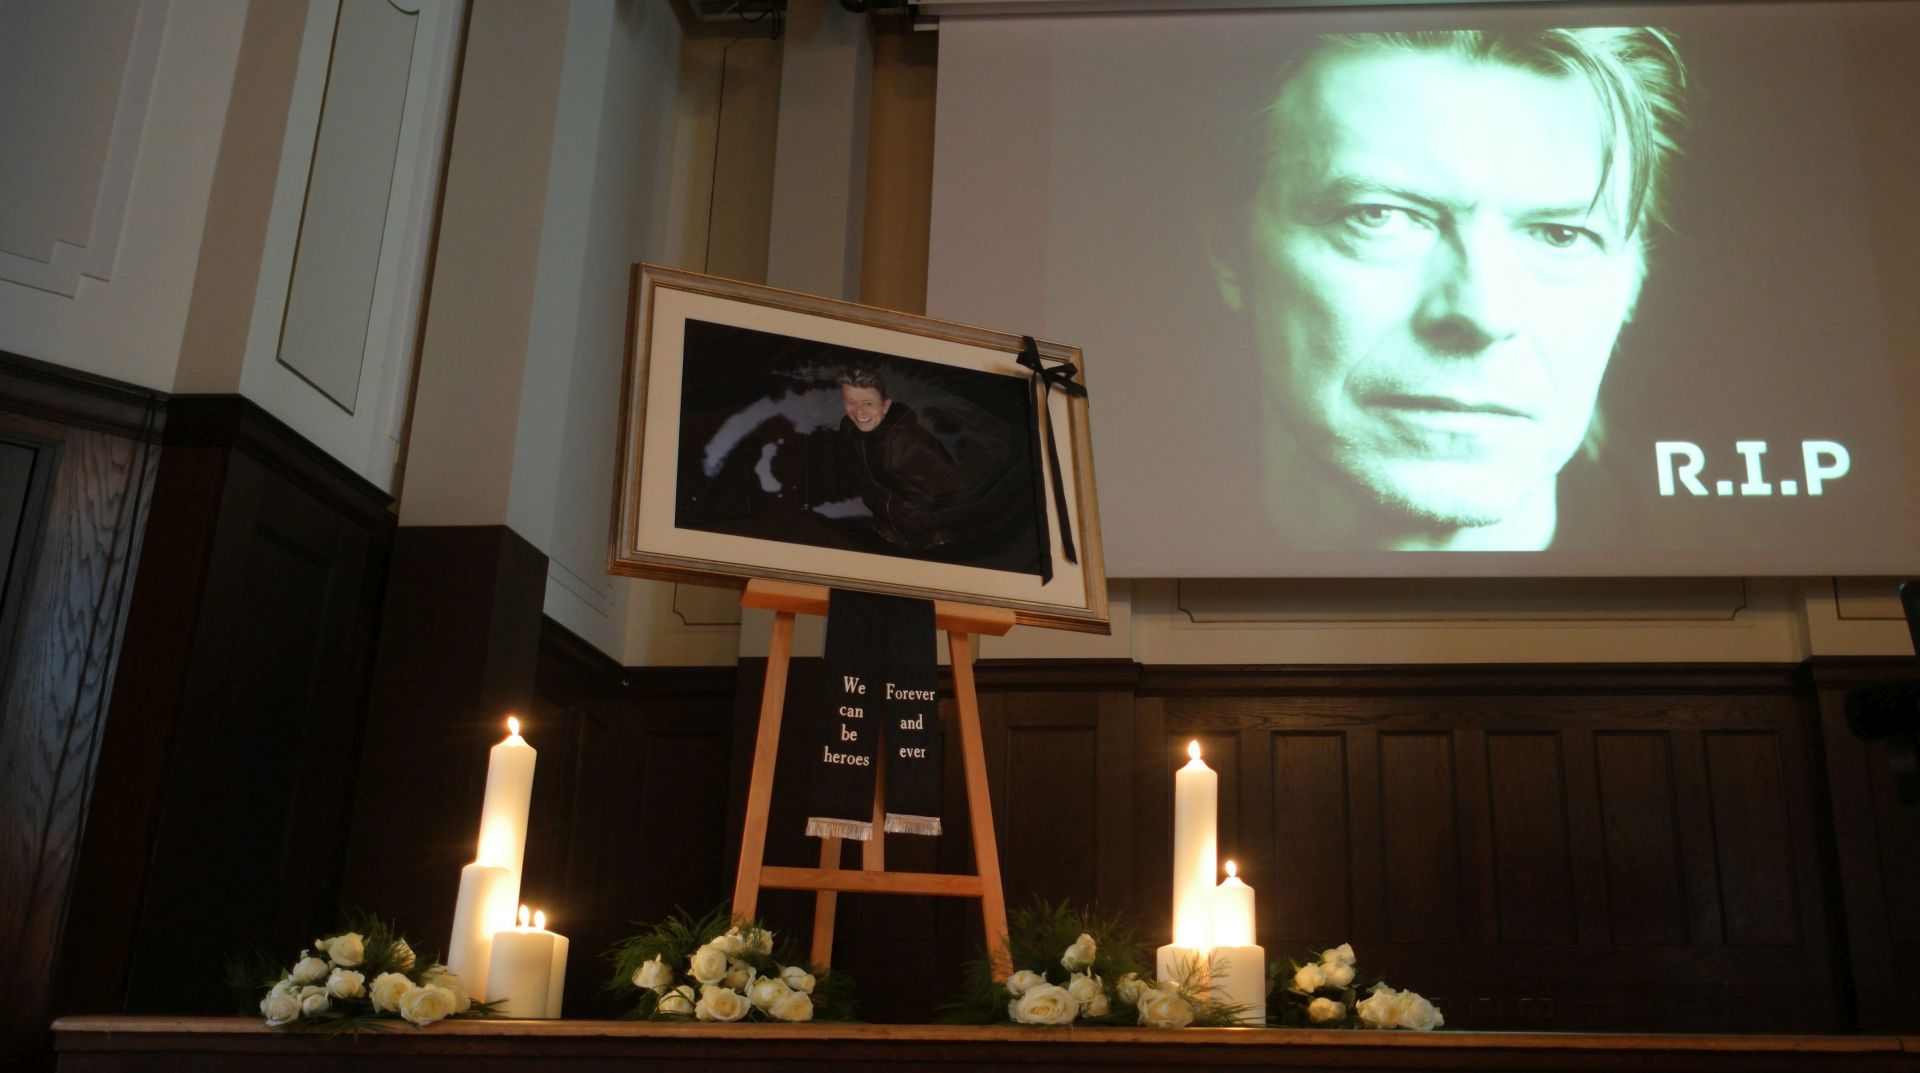 epa05103276 A memorial service for British musician David Bowie is held at the former Hansa studios in Berlin, Germany, 15 January 2016. Bowie died at the age of 69 on 10 January 2016, after suffering from cancer.  EPA/JOERG CARSTENSEN